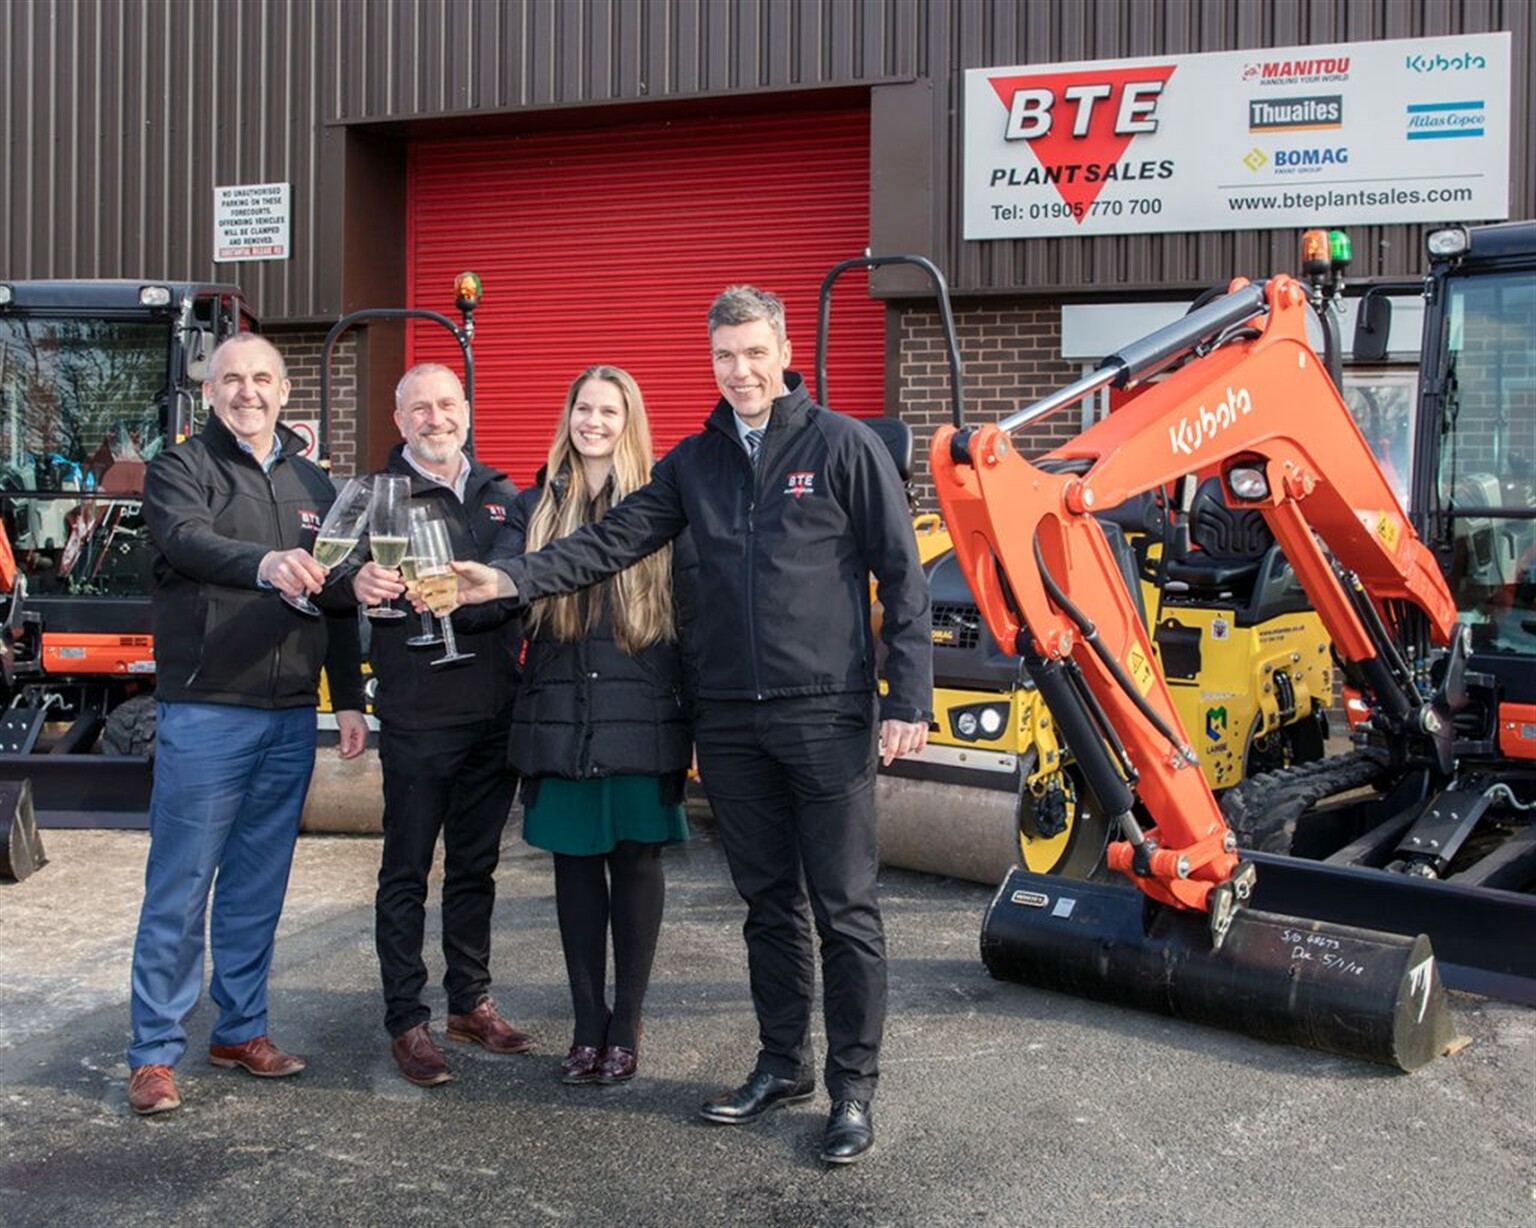 BTE Plant Sales Limited Open Their Fourth Depot As Record Sales Announced